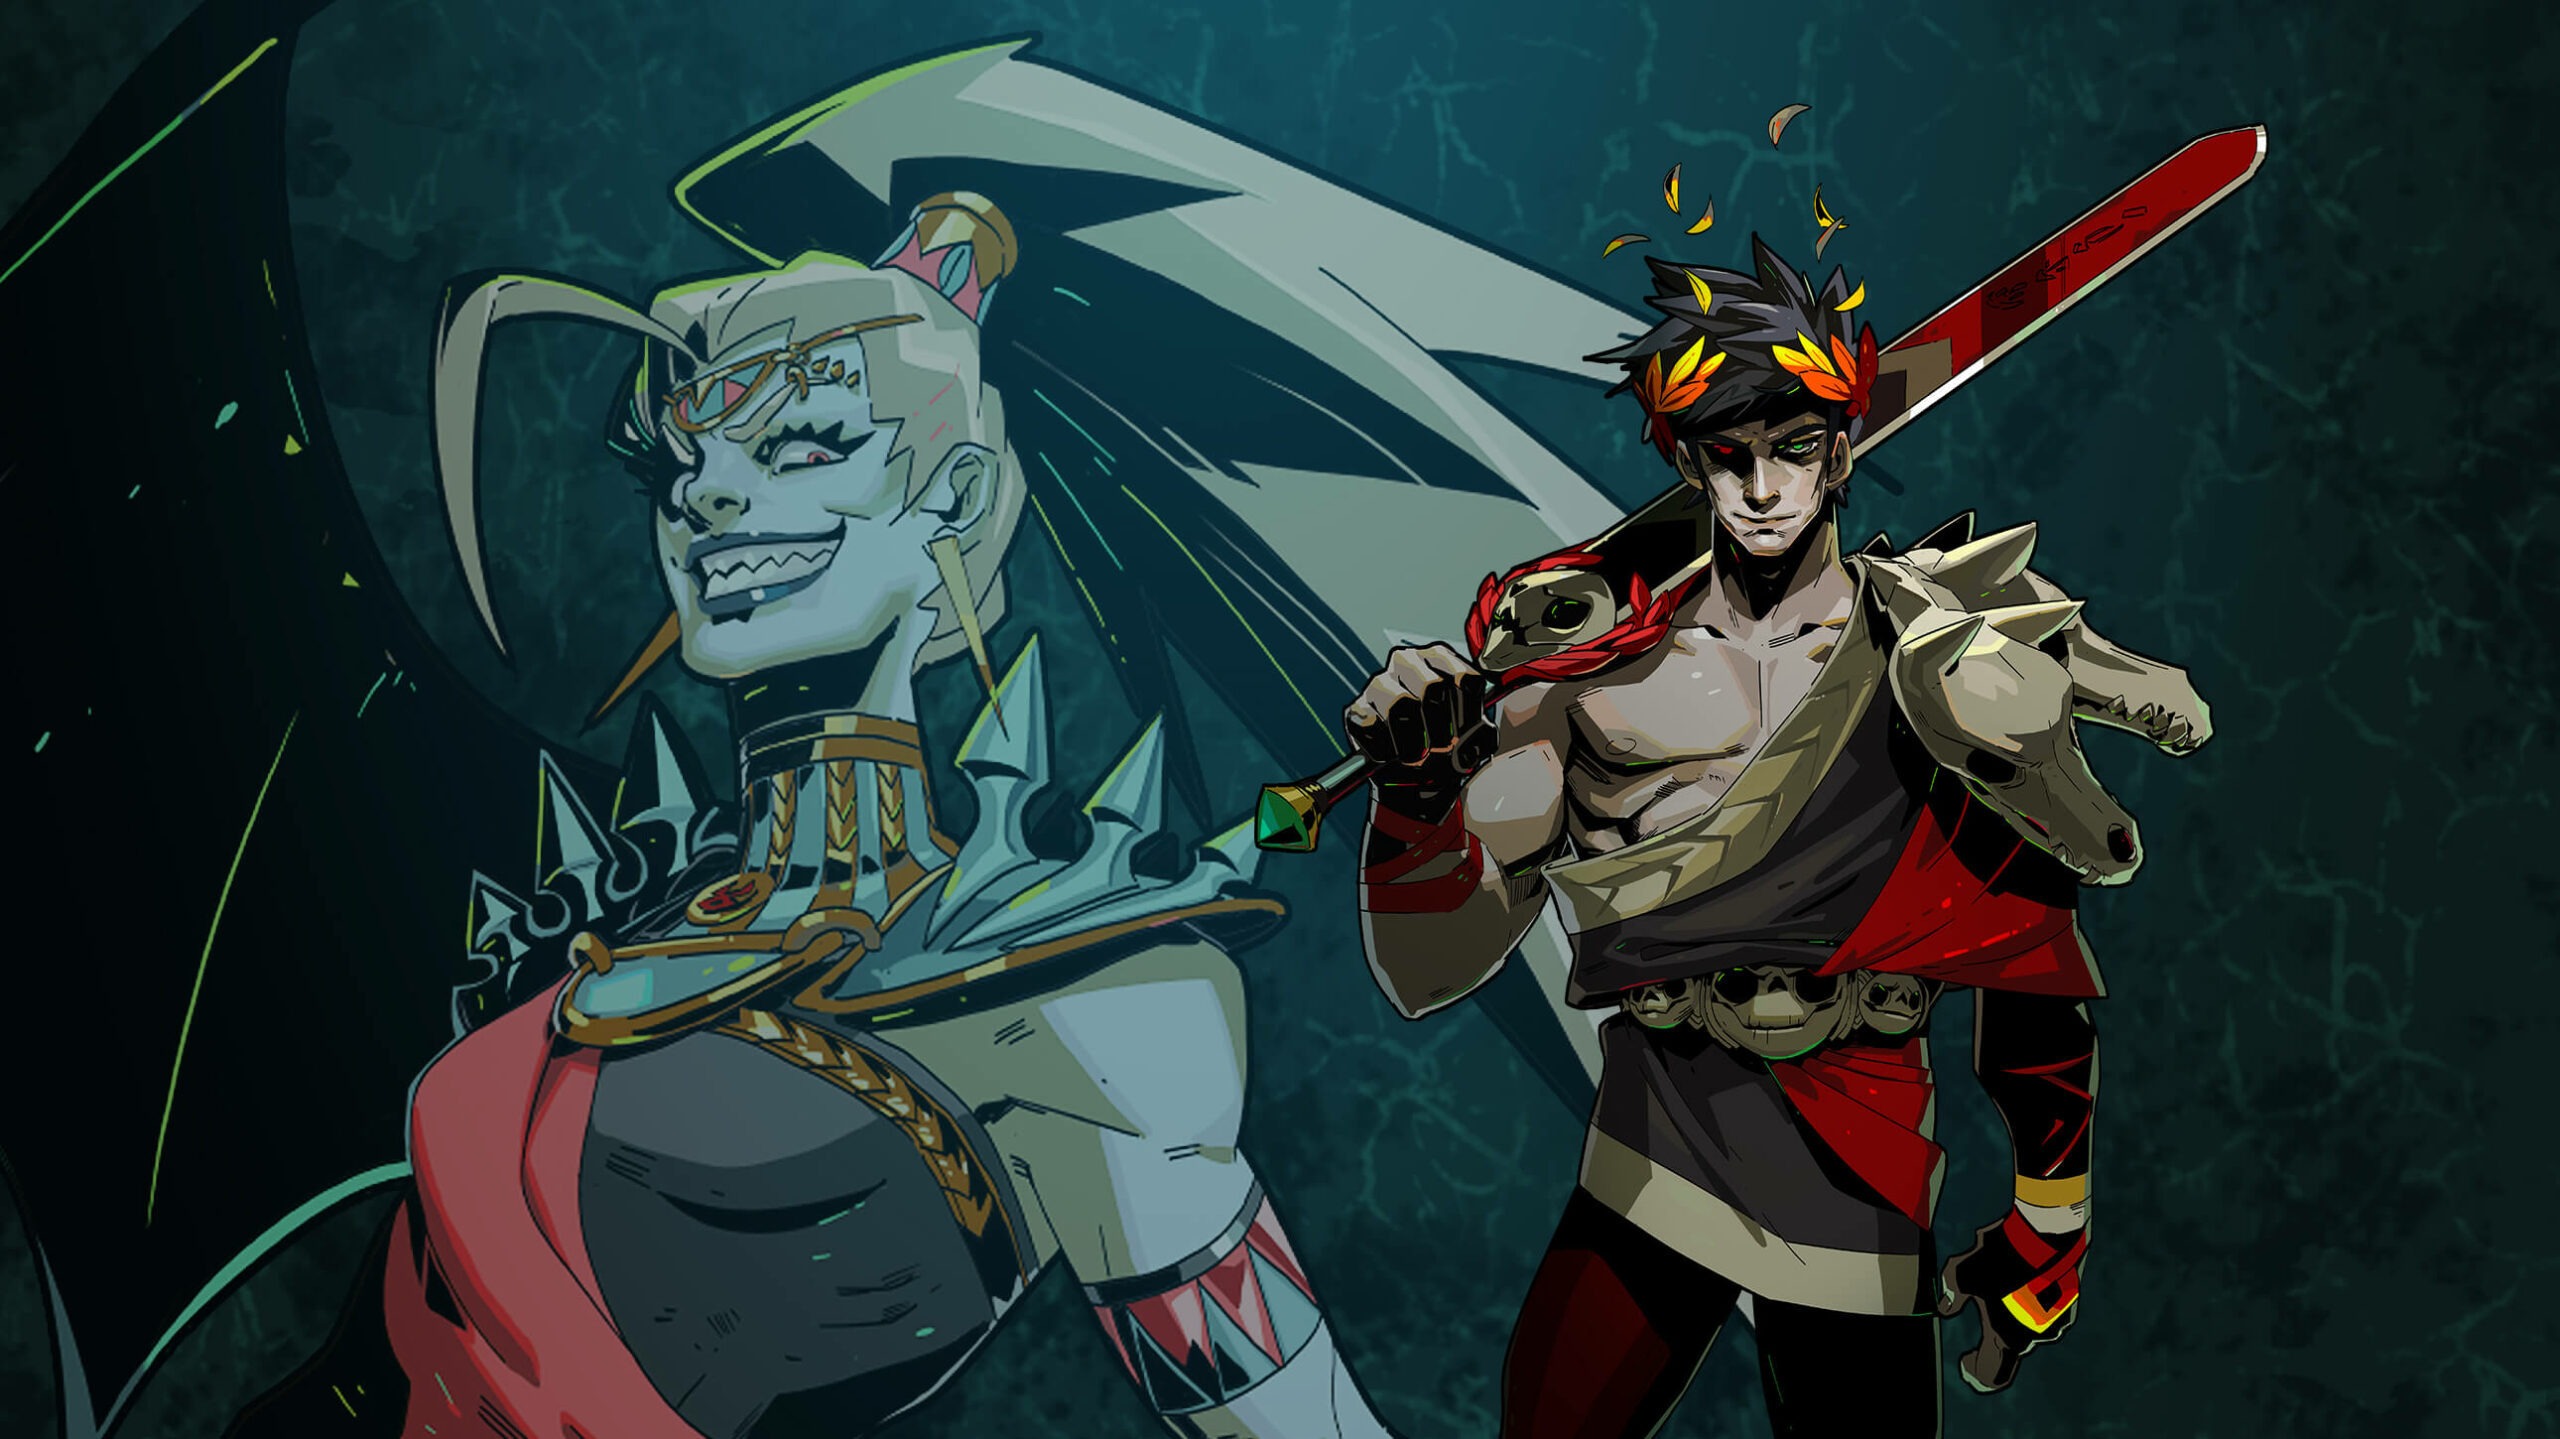 A still from the video game, Hades, featuring the main character Zagreus and one of the game's enemies, Alecto. The game was a big winner at the BAFTA video games awards, and, featuring a bisexual main character, a great sign for diversity in the games industry.